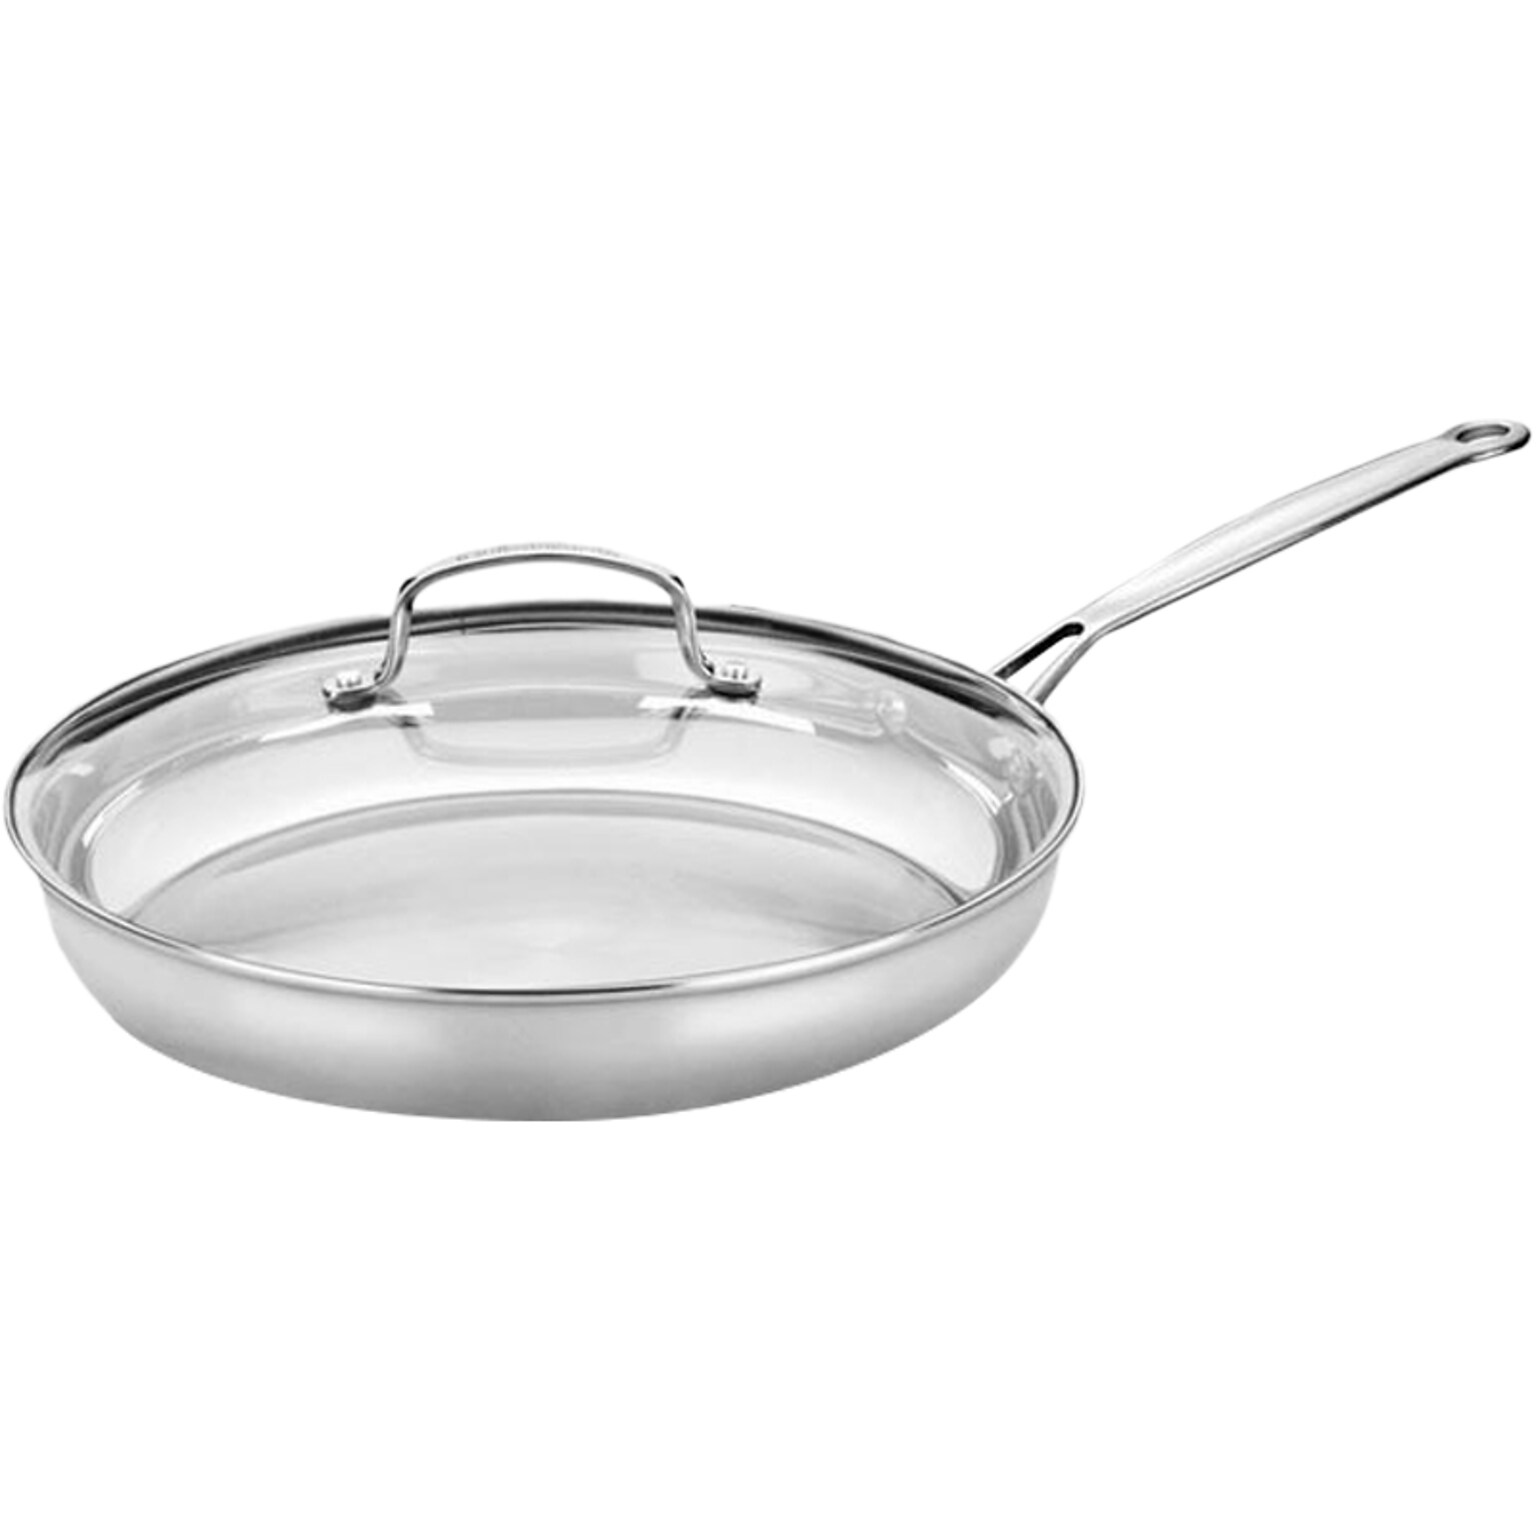 Cuisinart Chefs Classic Stainless Steel 12 Fry Skillet with Cover, Silver (722-30G)